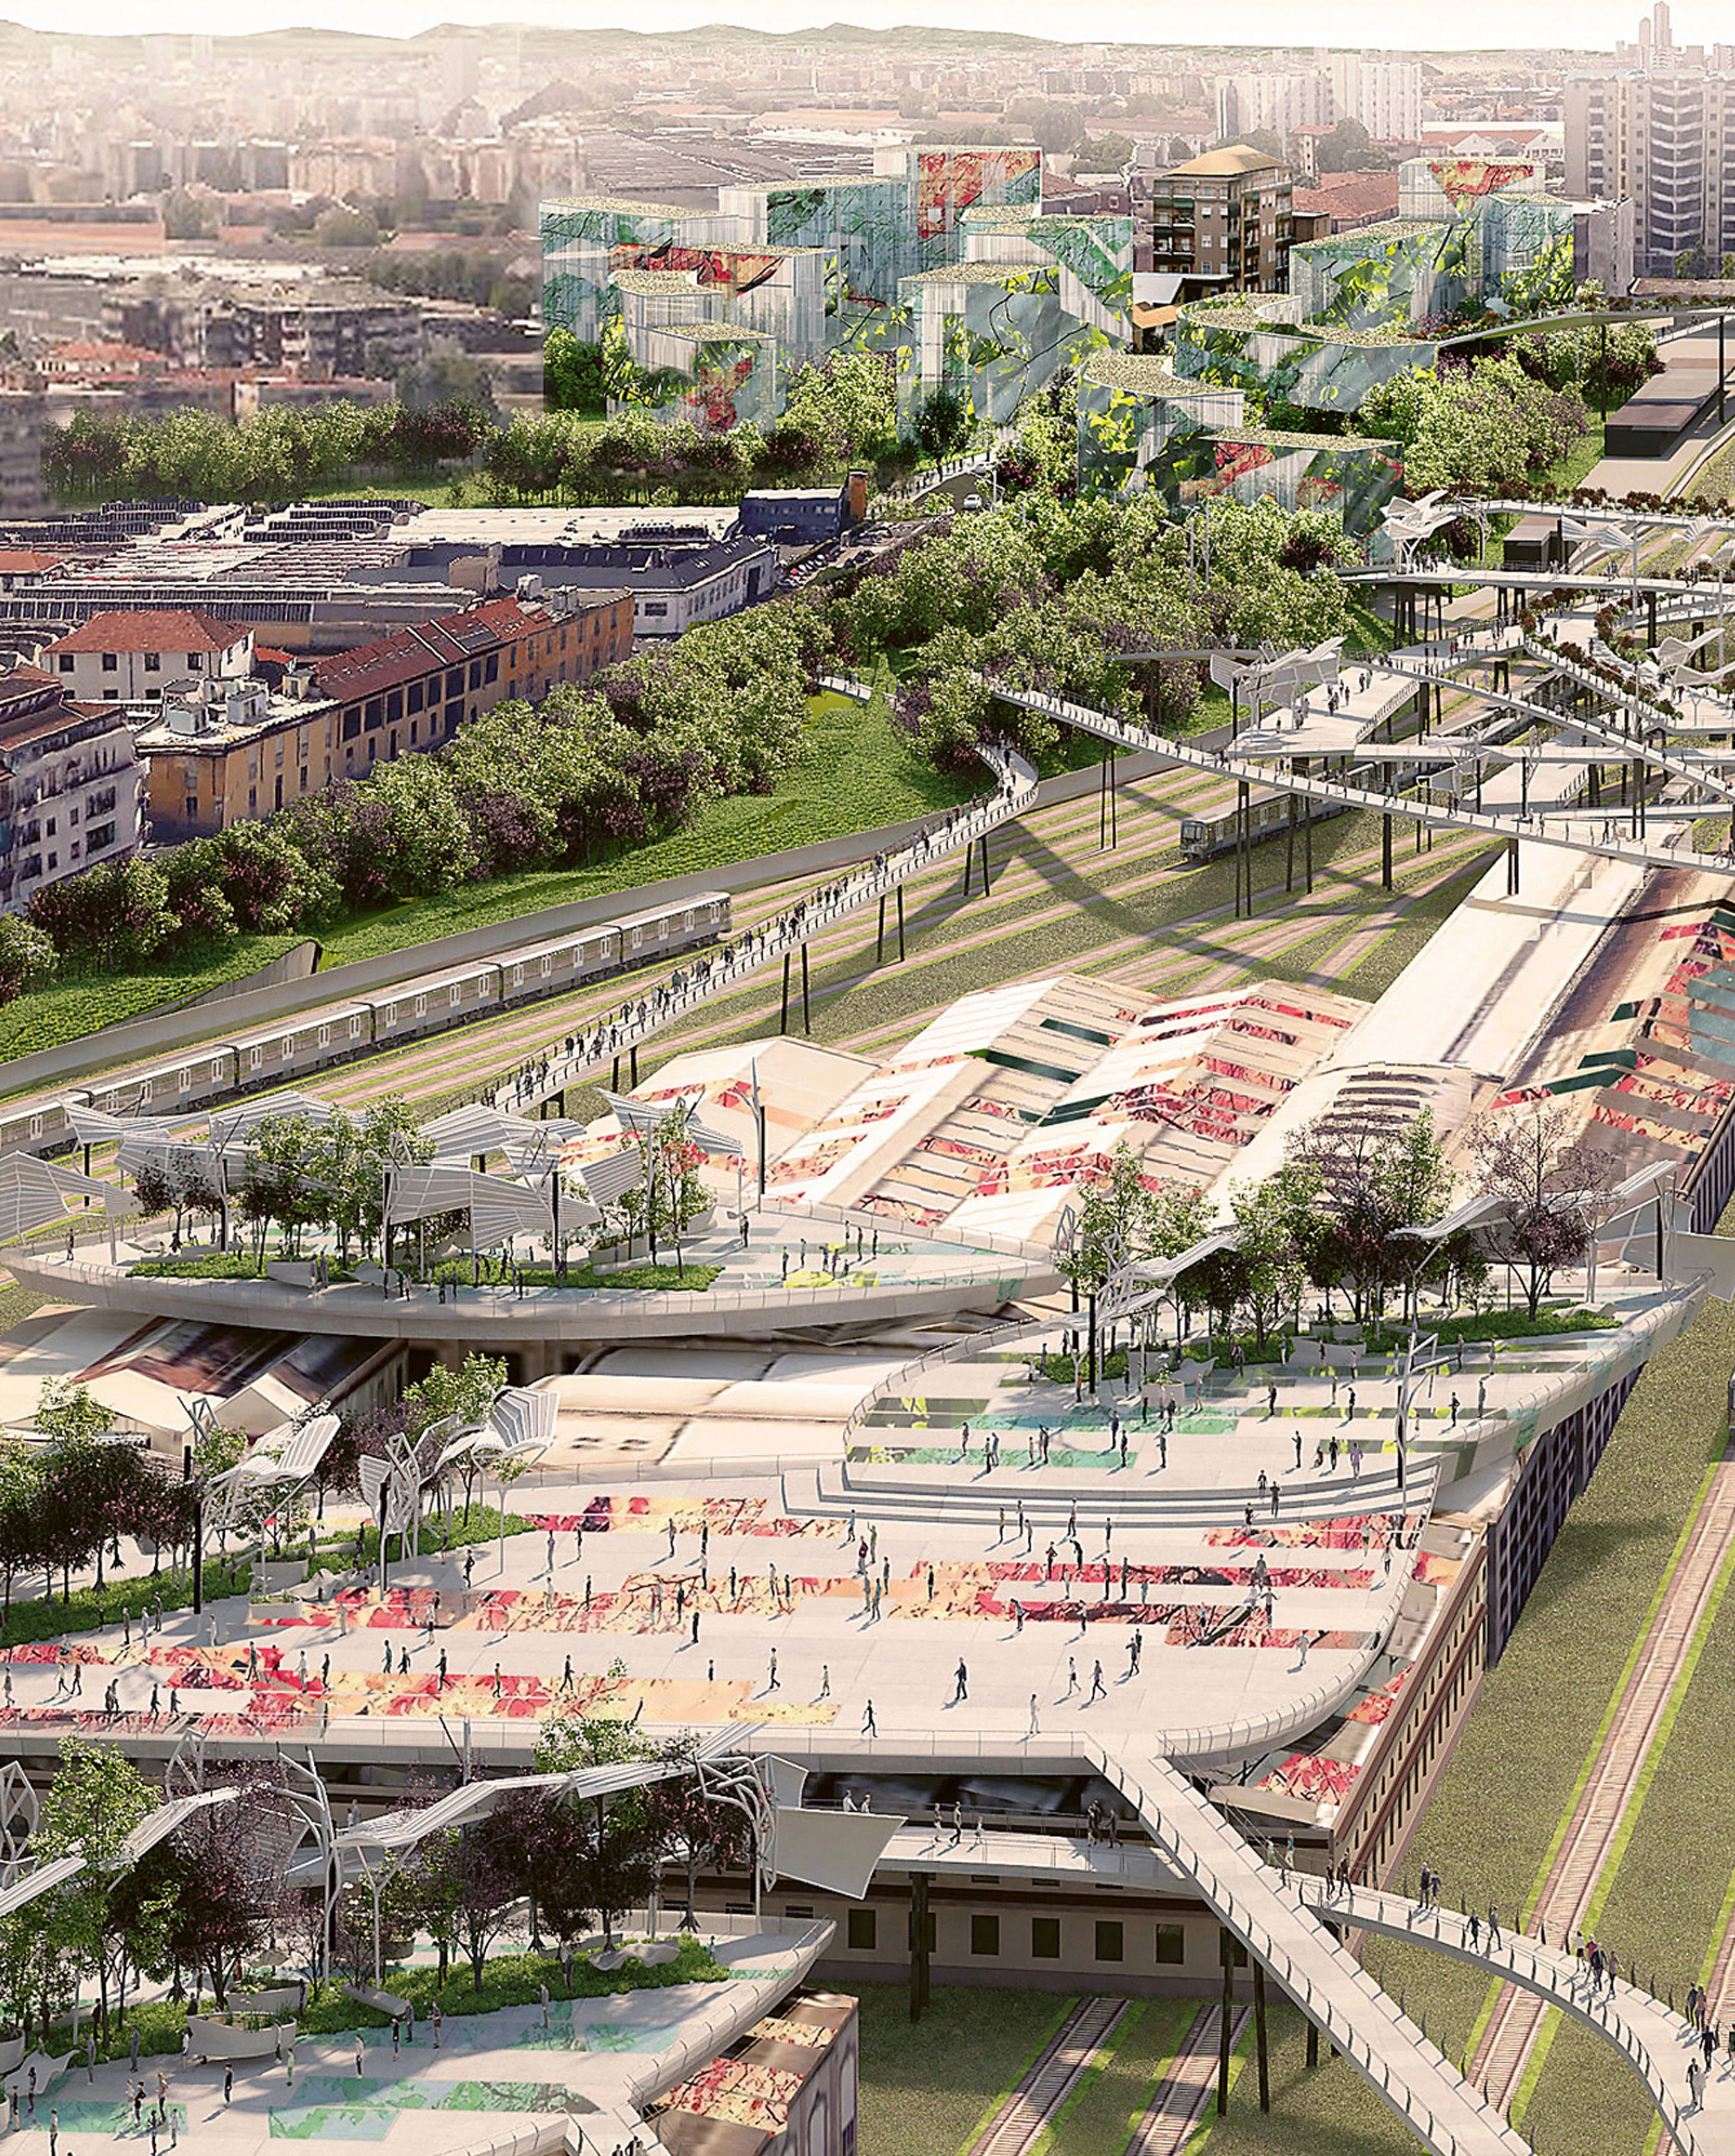 A new vision for Milan’s disused railway yards, Milan